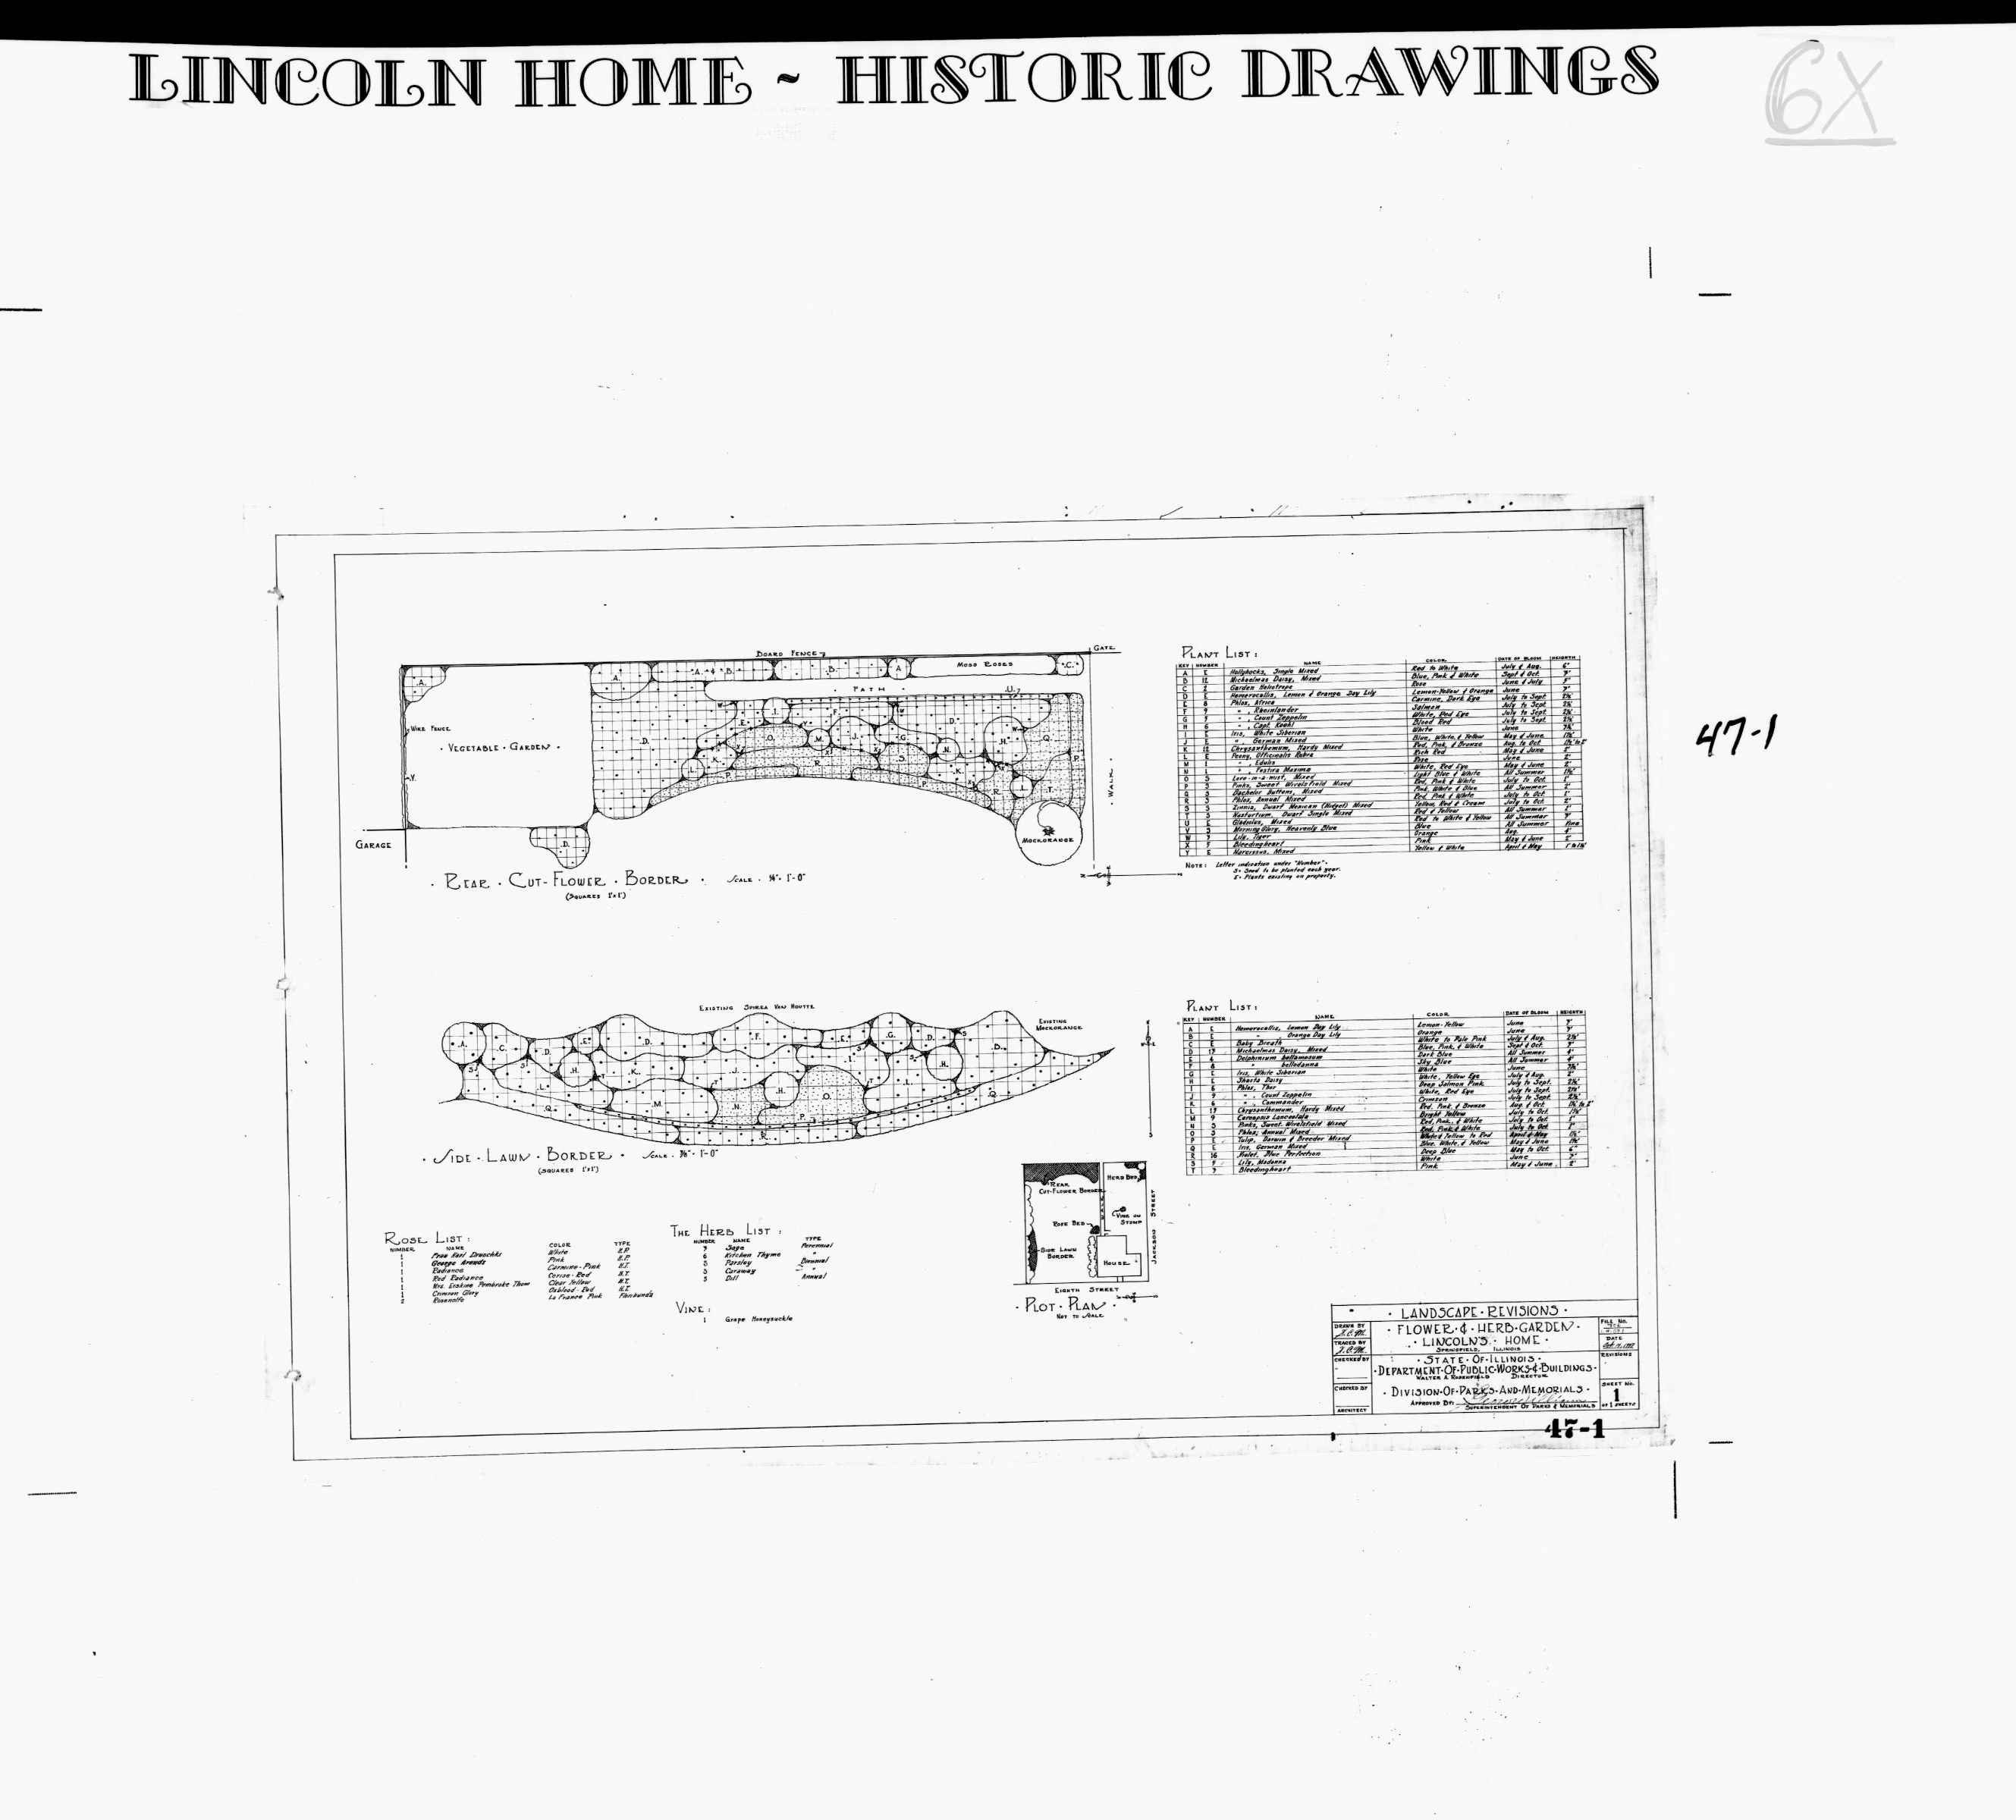 Lincoln Home - Historic Drawings 23 Lincoln, home, historic drawings, landscape revisions